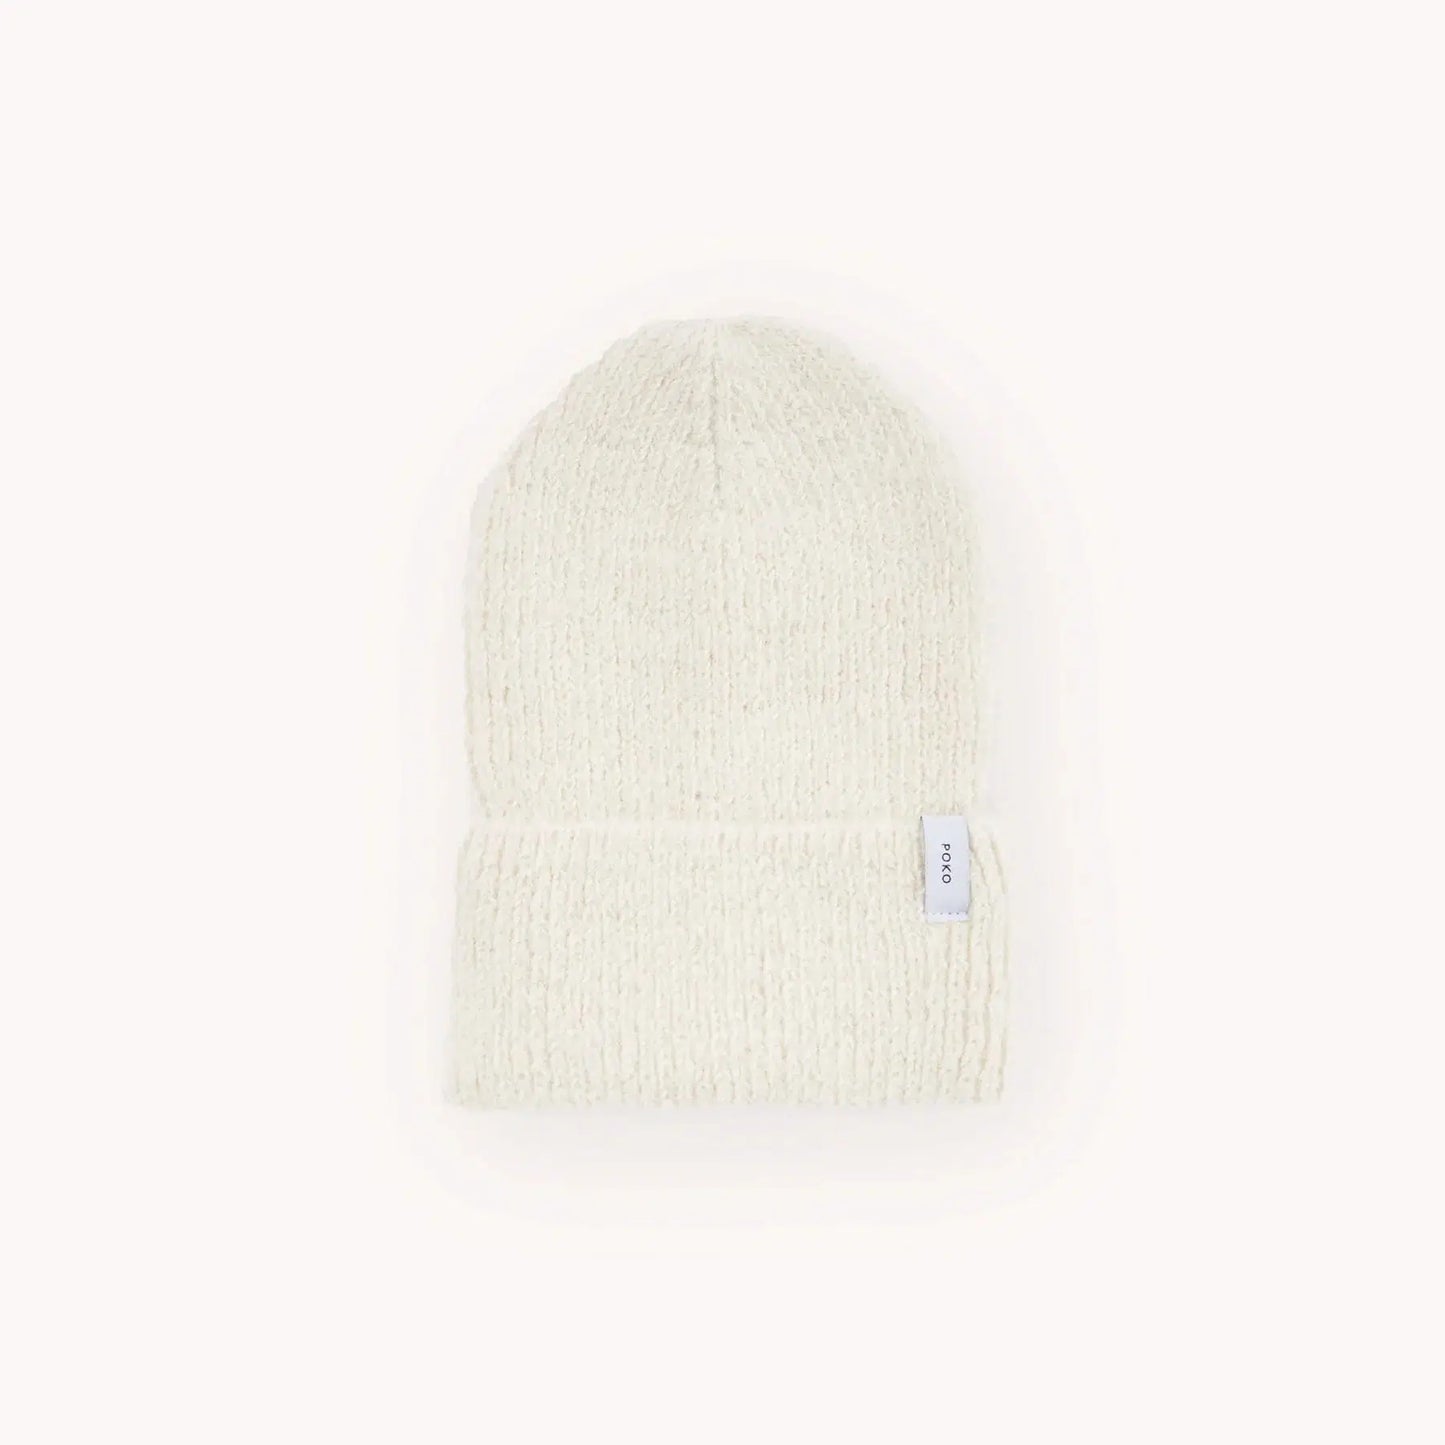 Tundra Hat - Frost Ethical Accessories Pokoloko Prettycleanshop